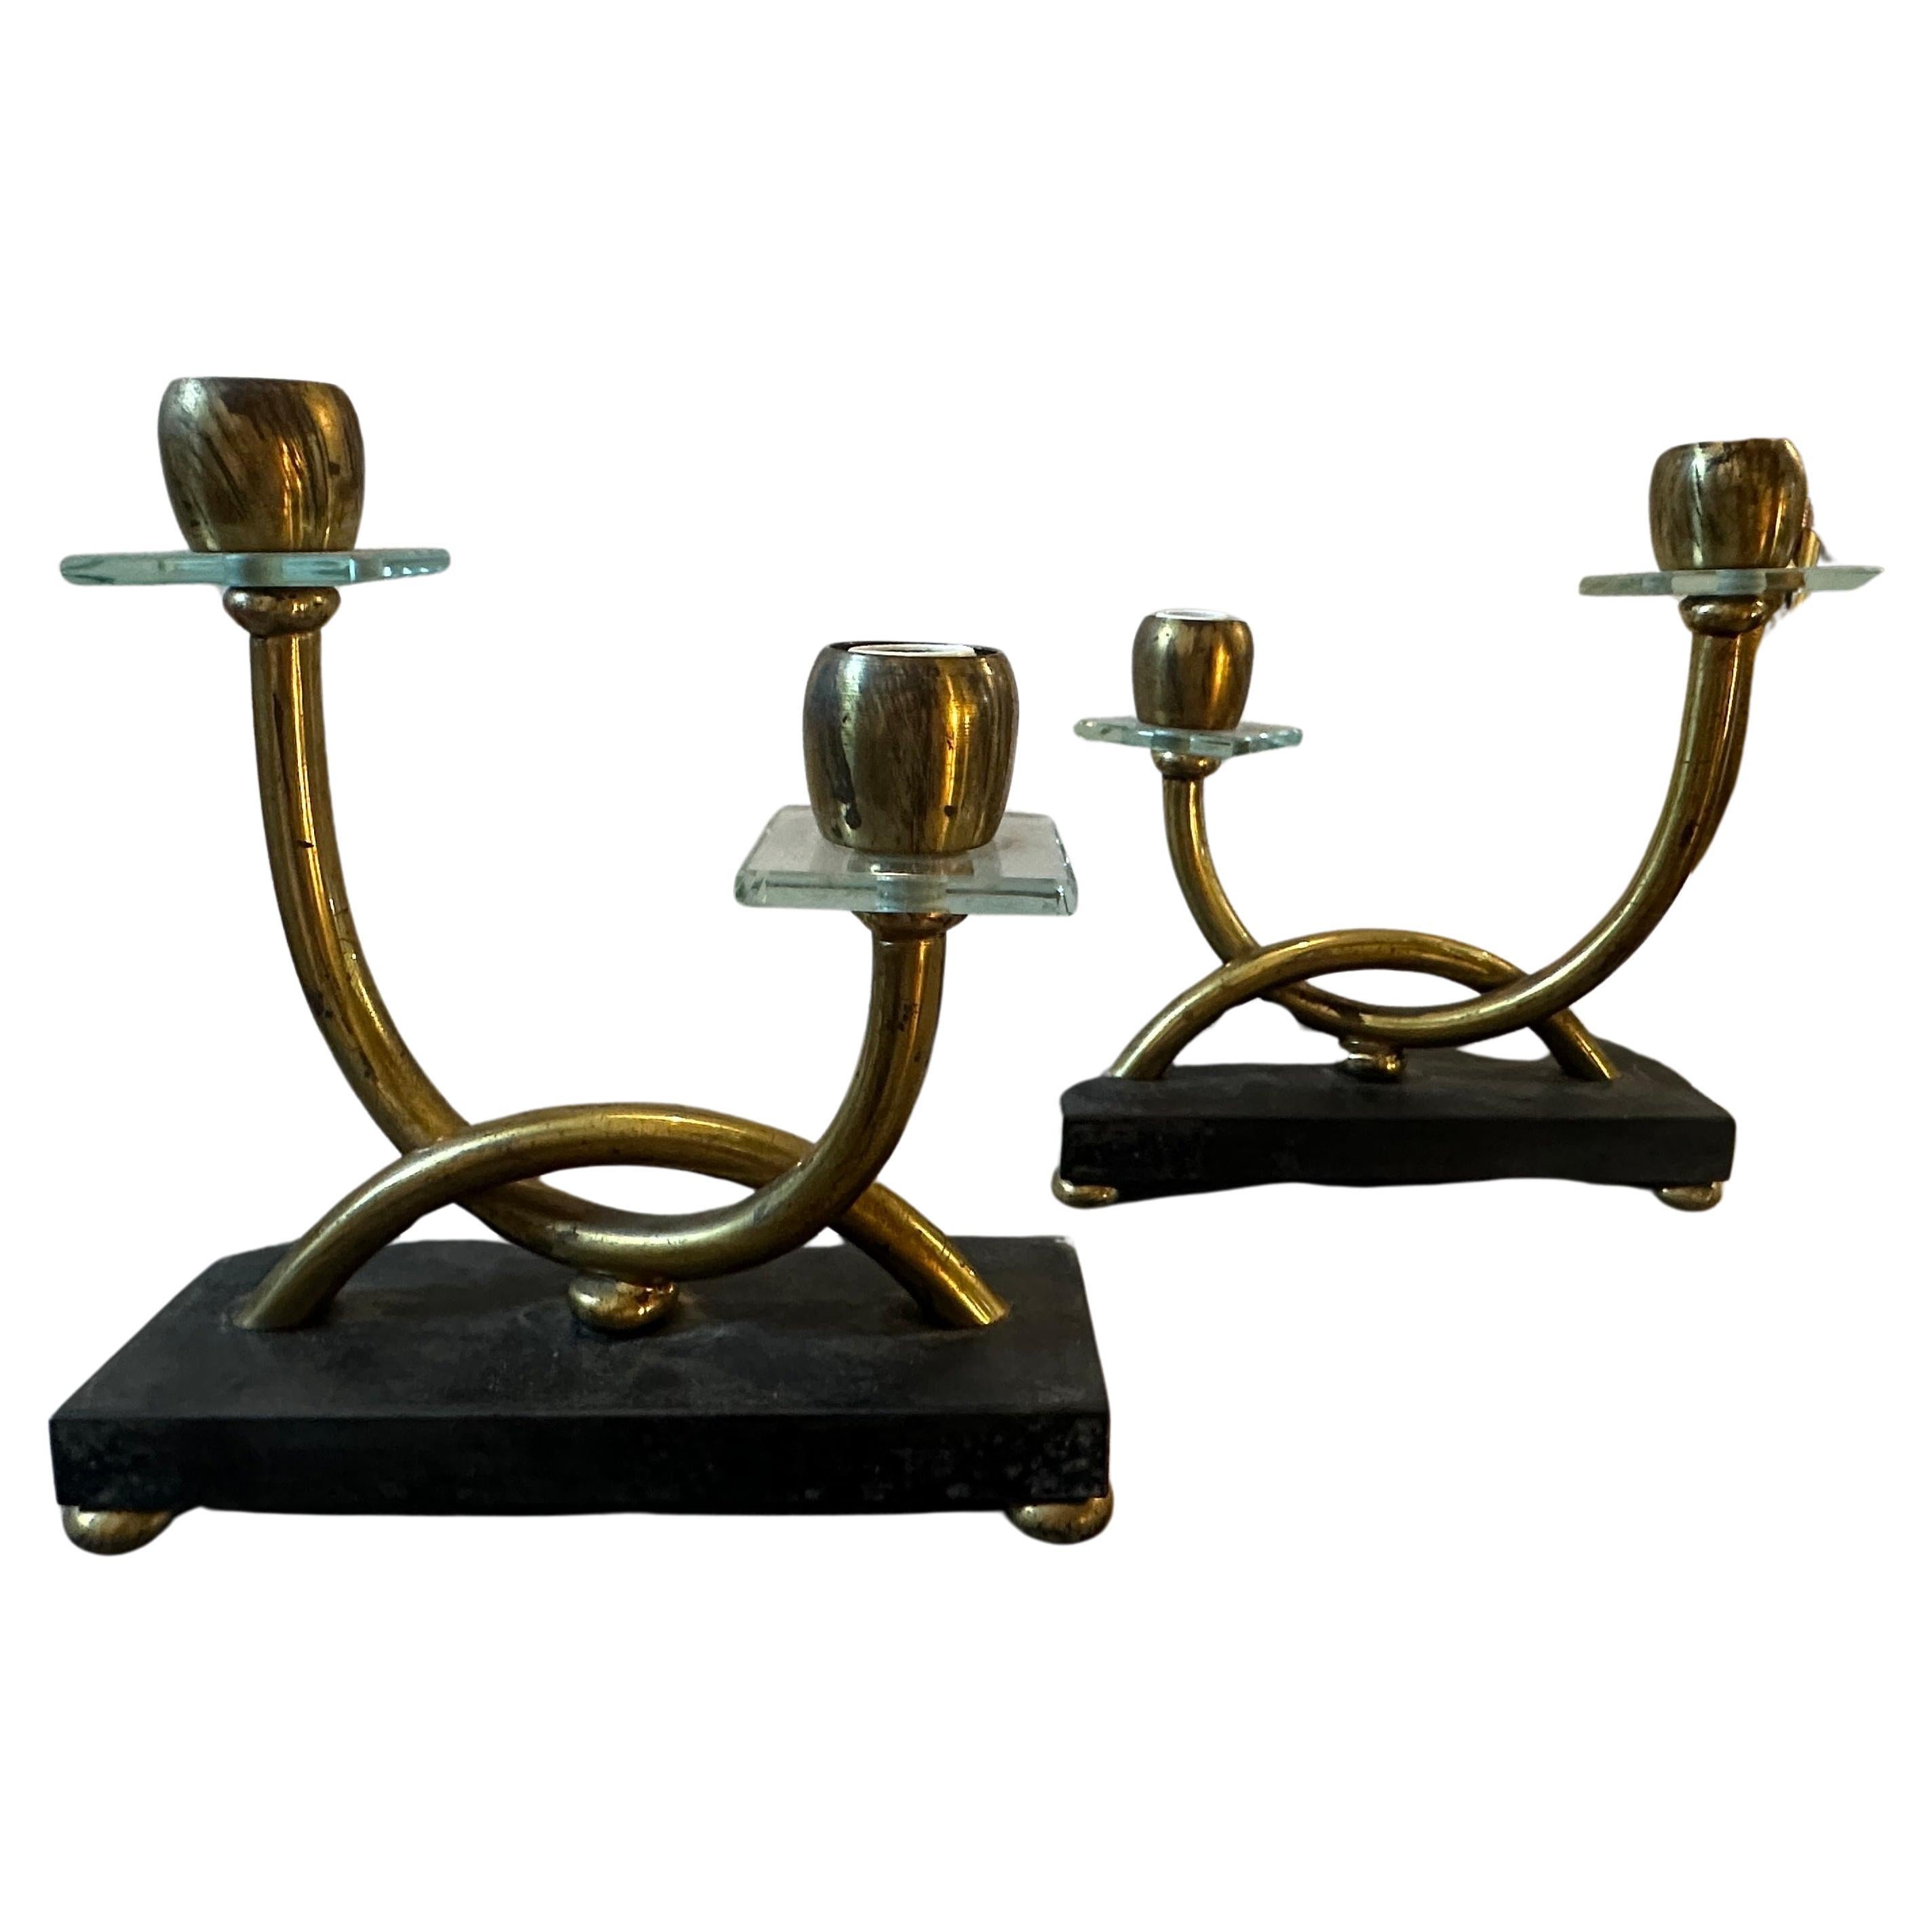 Two 1930s Giò Ponti style Art Deco Brass, Marble and Glass Italian Table Lamps For Sale